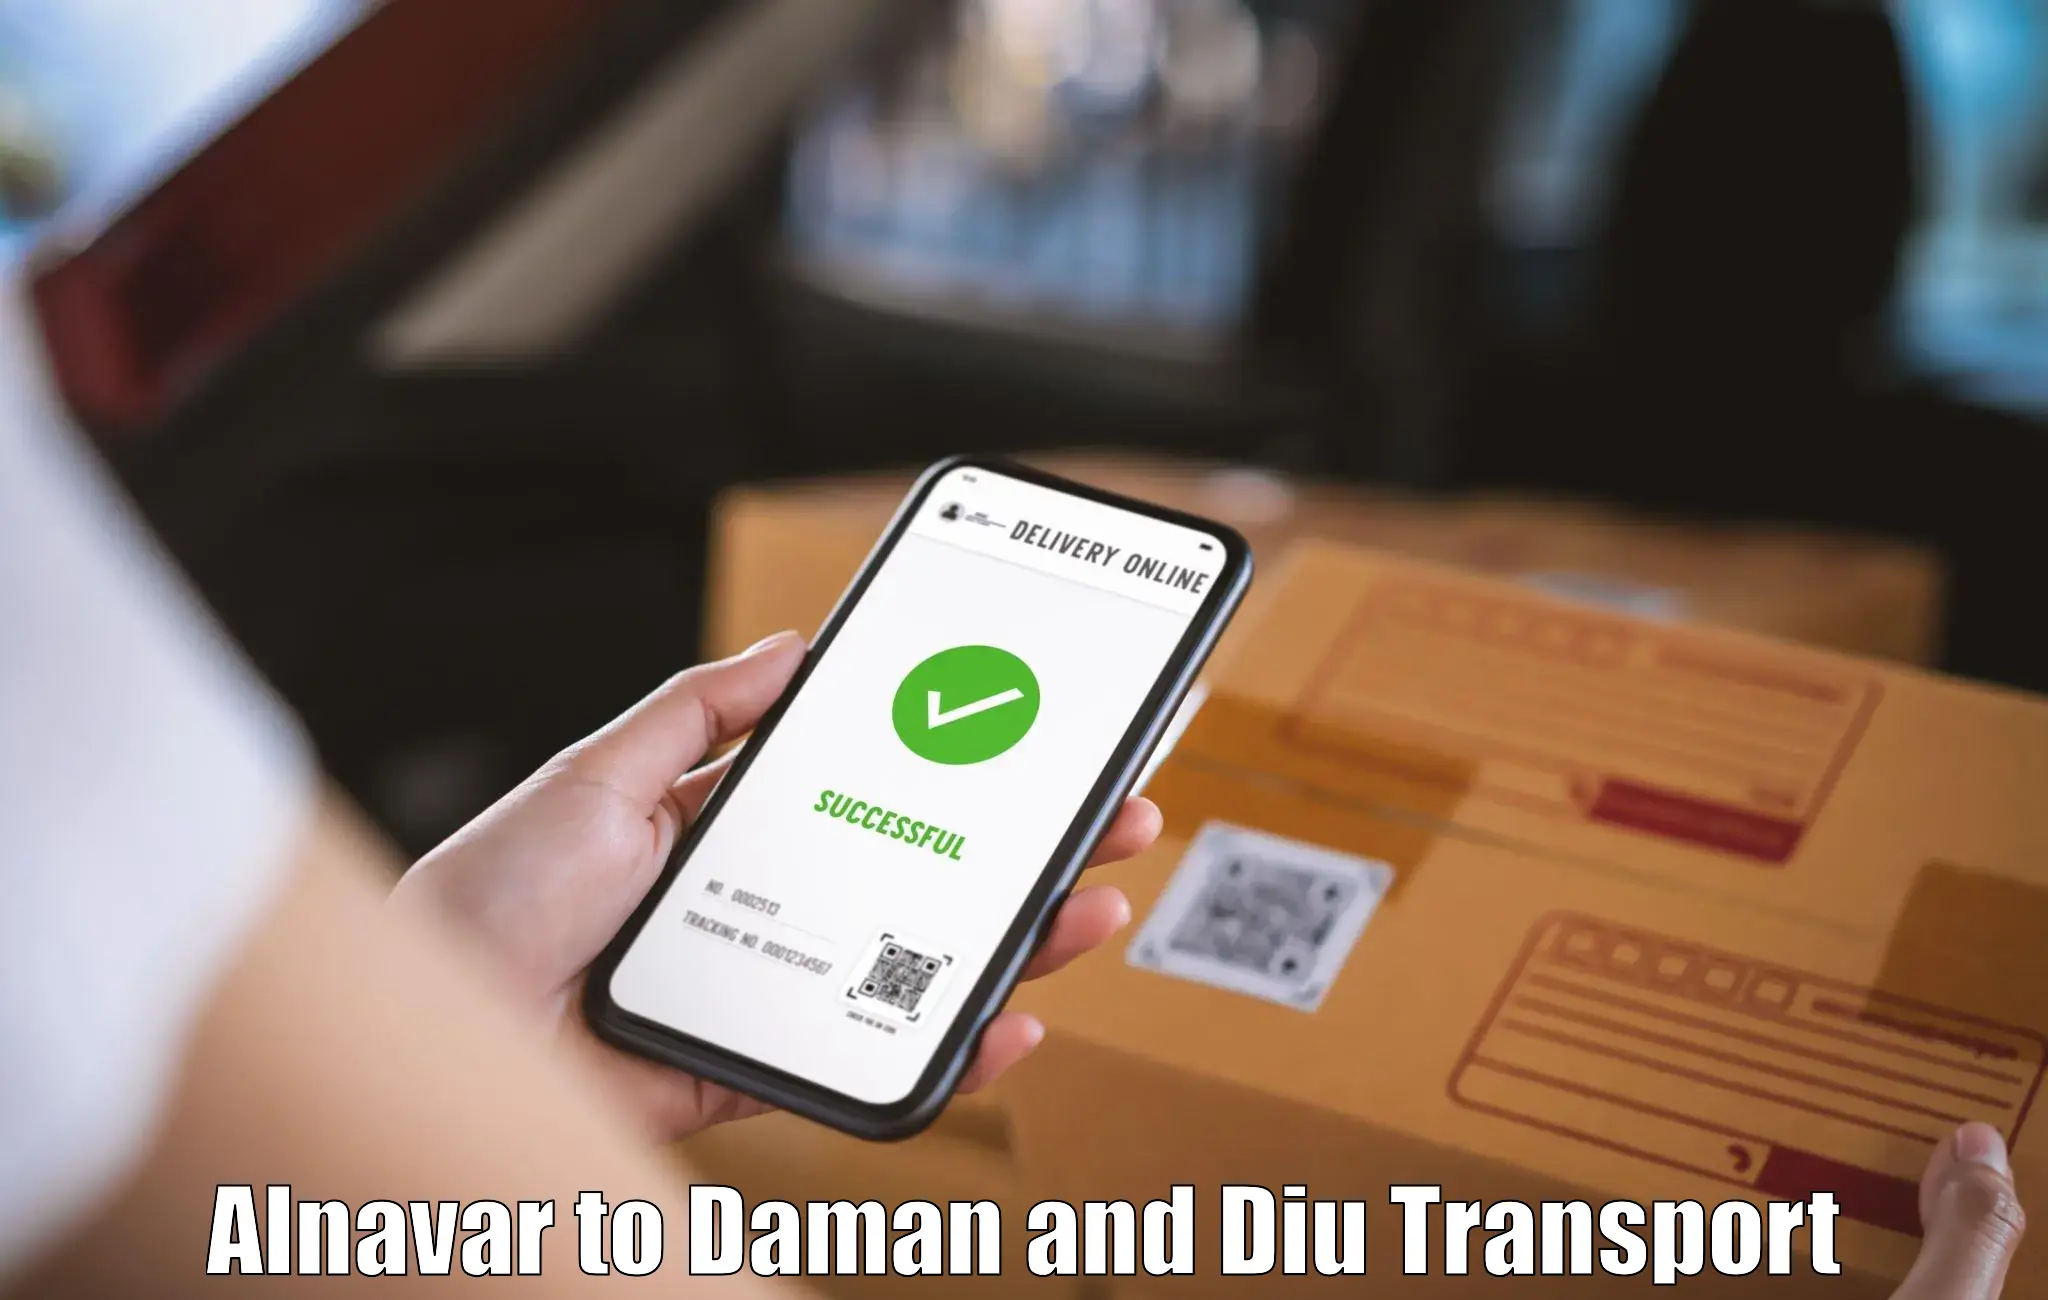 Container transport service Alnavar to Daman and Diu